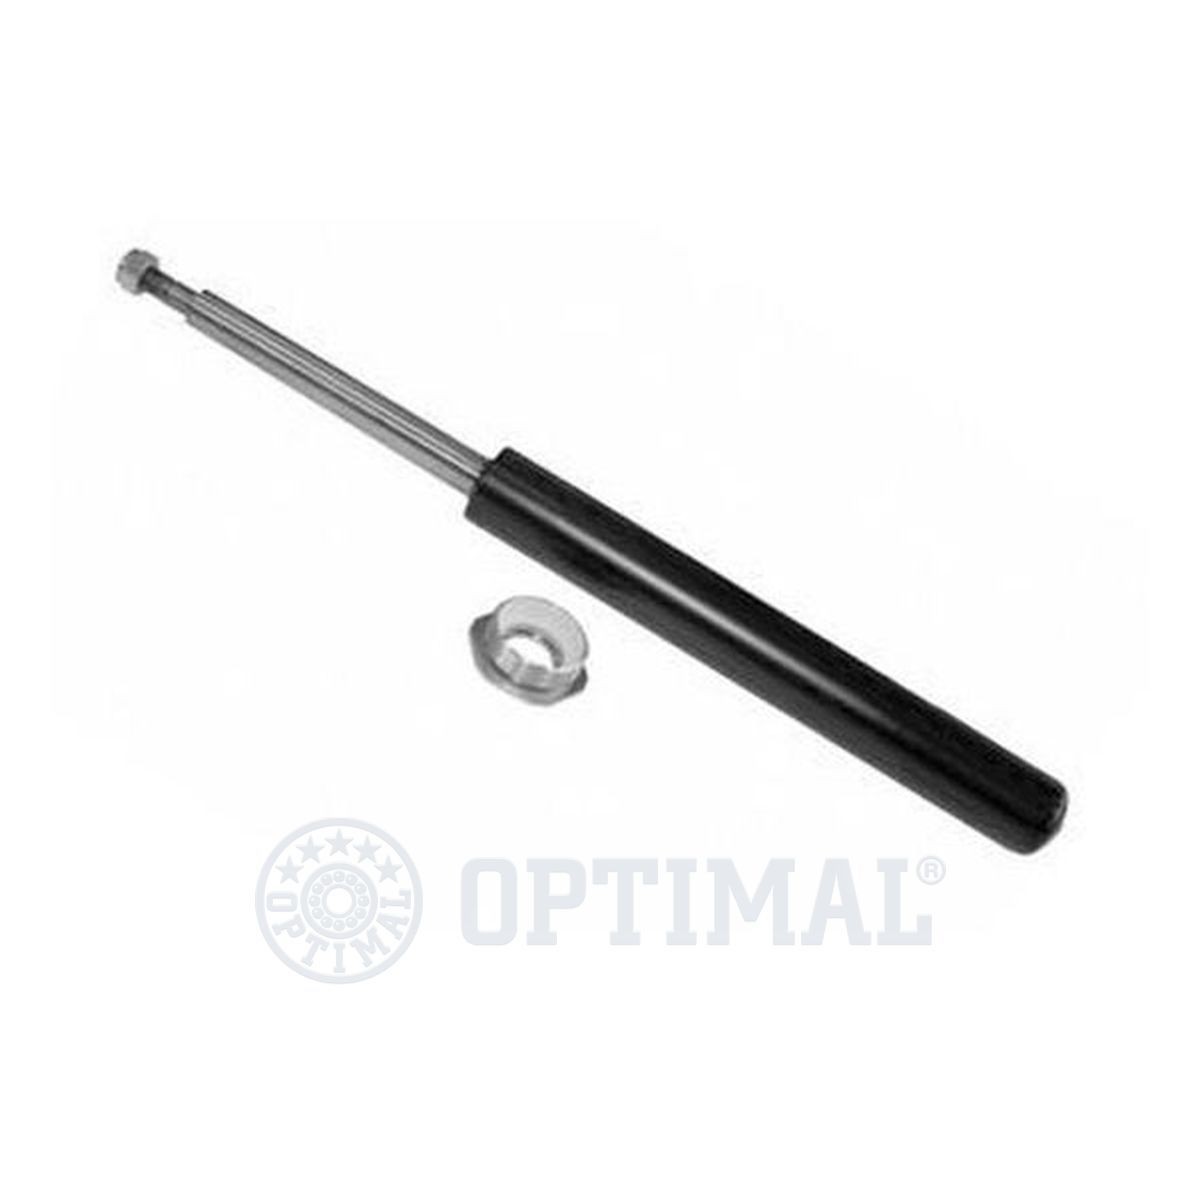 OPTIMAL A-67629G Shock absorber Front Axle, Gas Pressure, Twin-Tube, Suspension Strut Insert, Top pin, Bottom Clamp